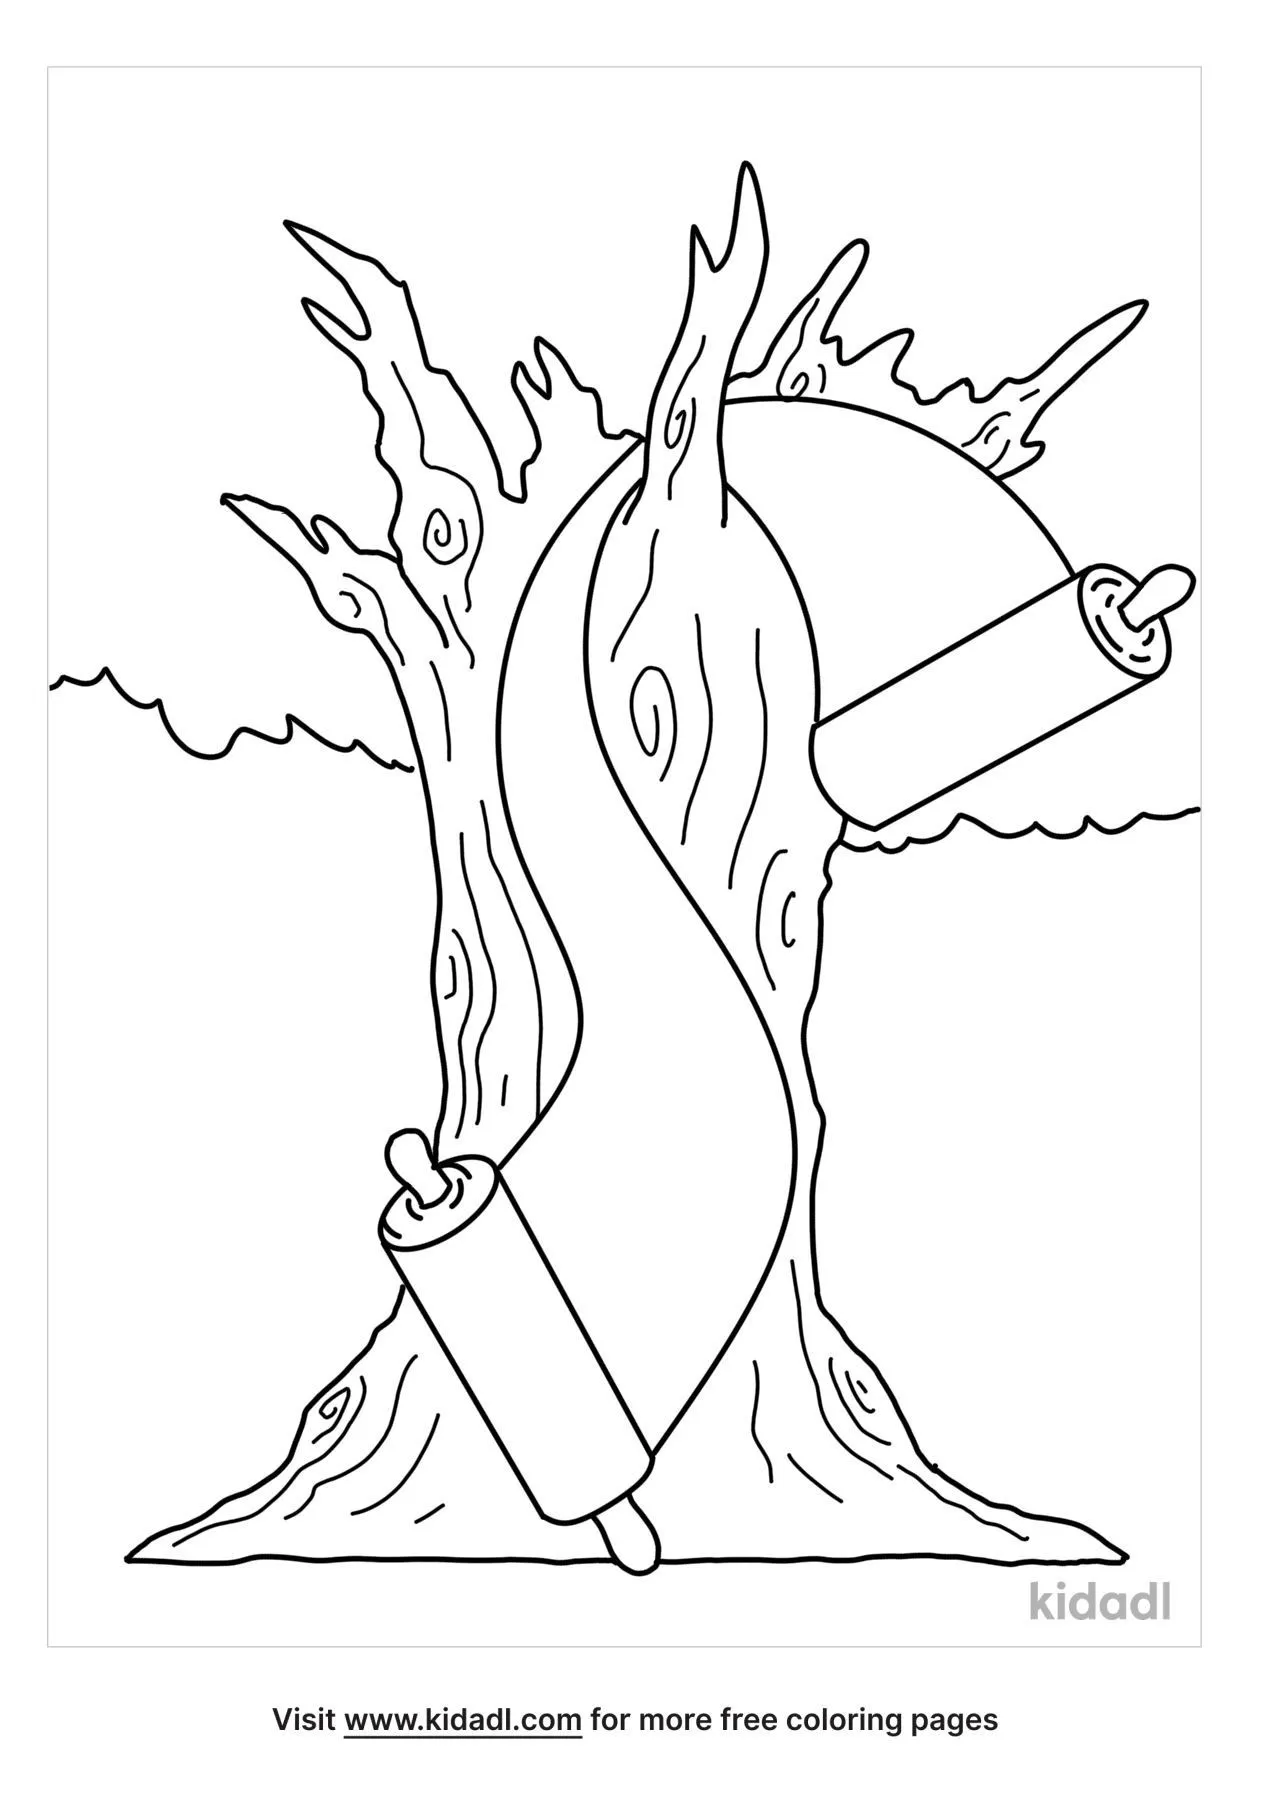 Mitzvah Tree Coloring Page